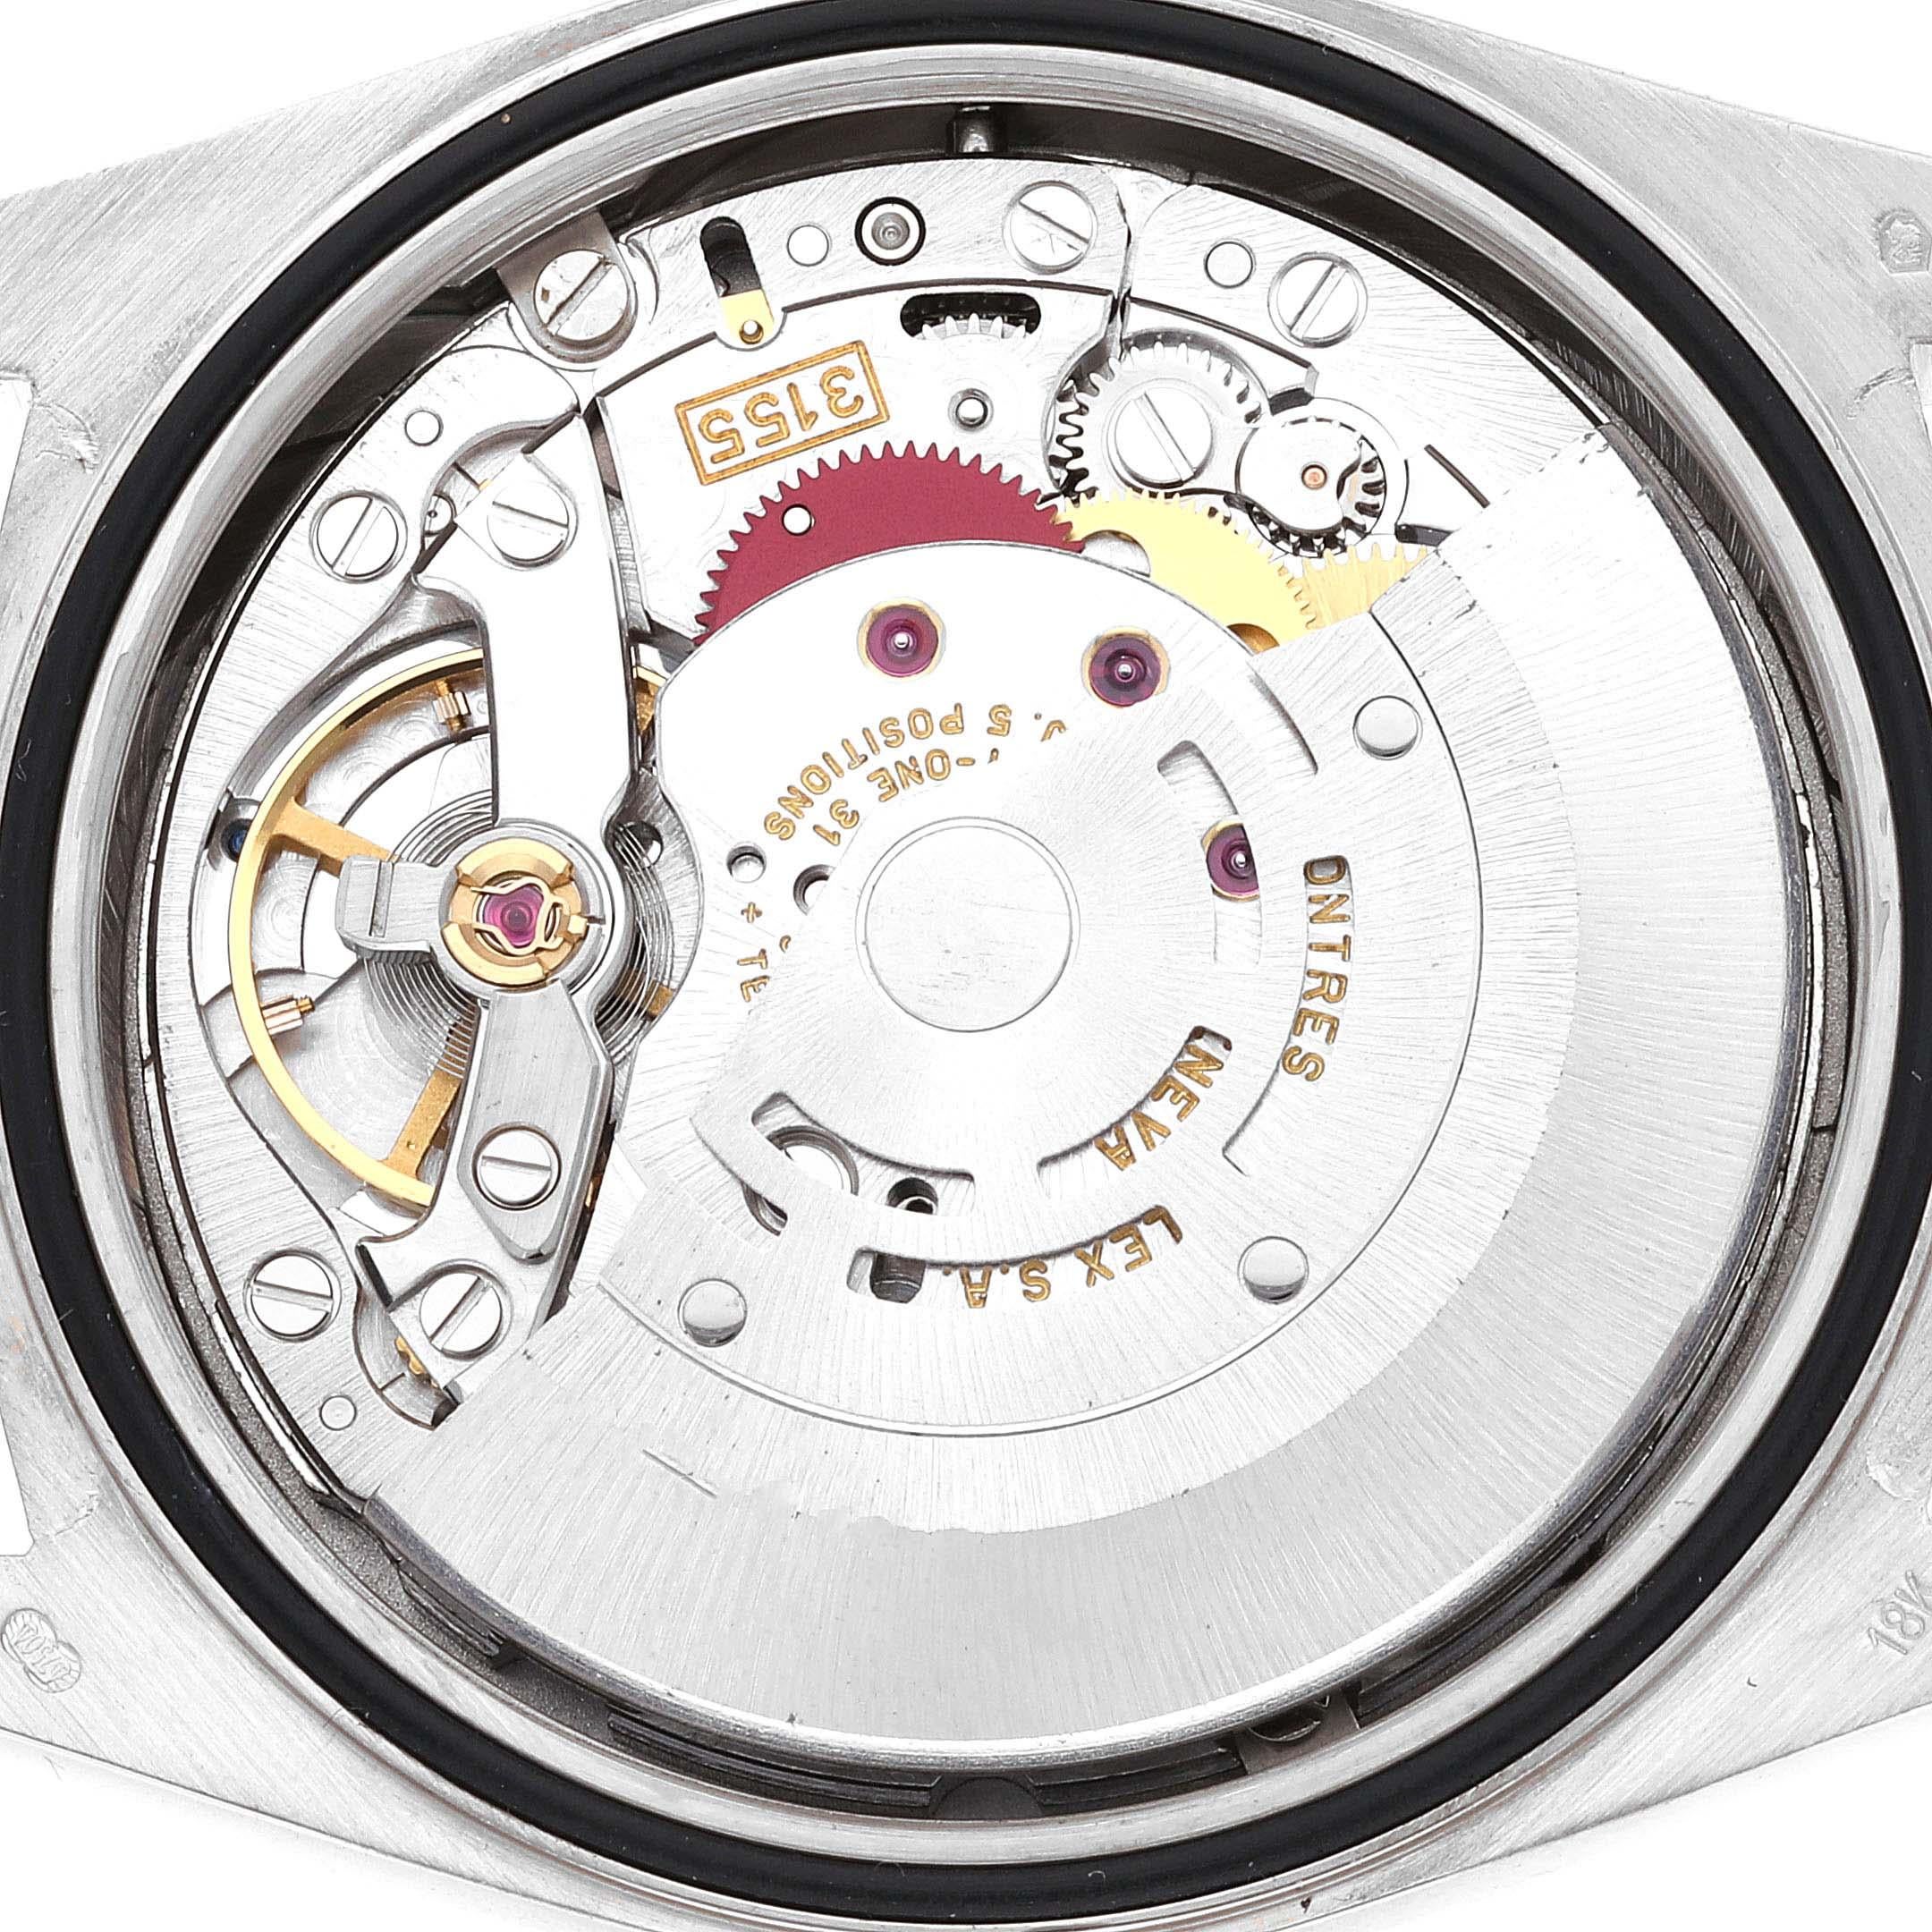 Rolex President Day-Date White Gold Myriad Diamond Dial Mens Watch 18239 For Sale 2